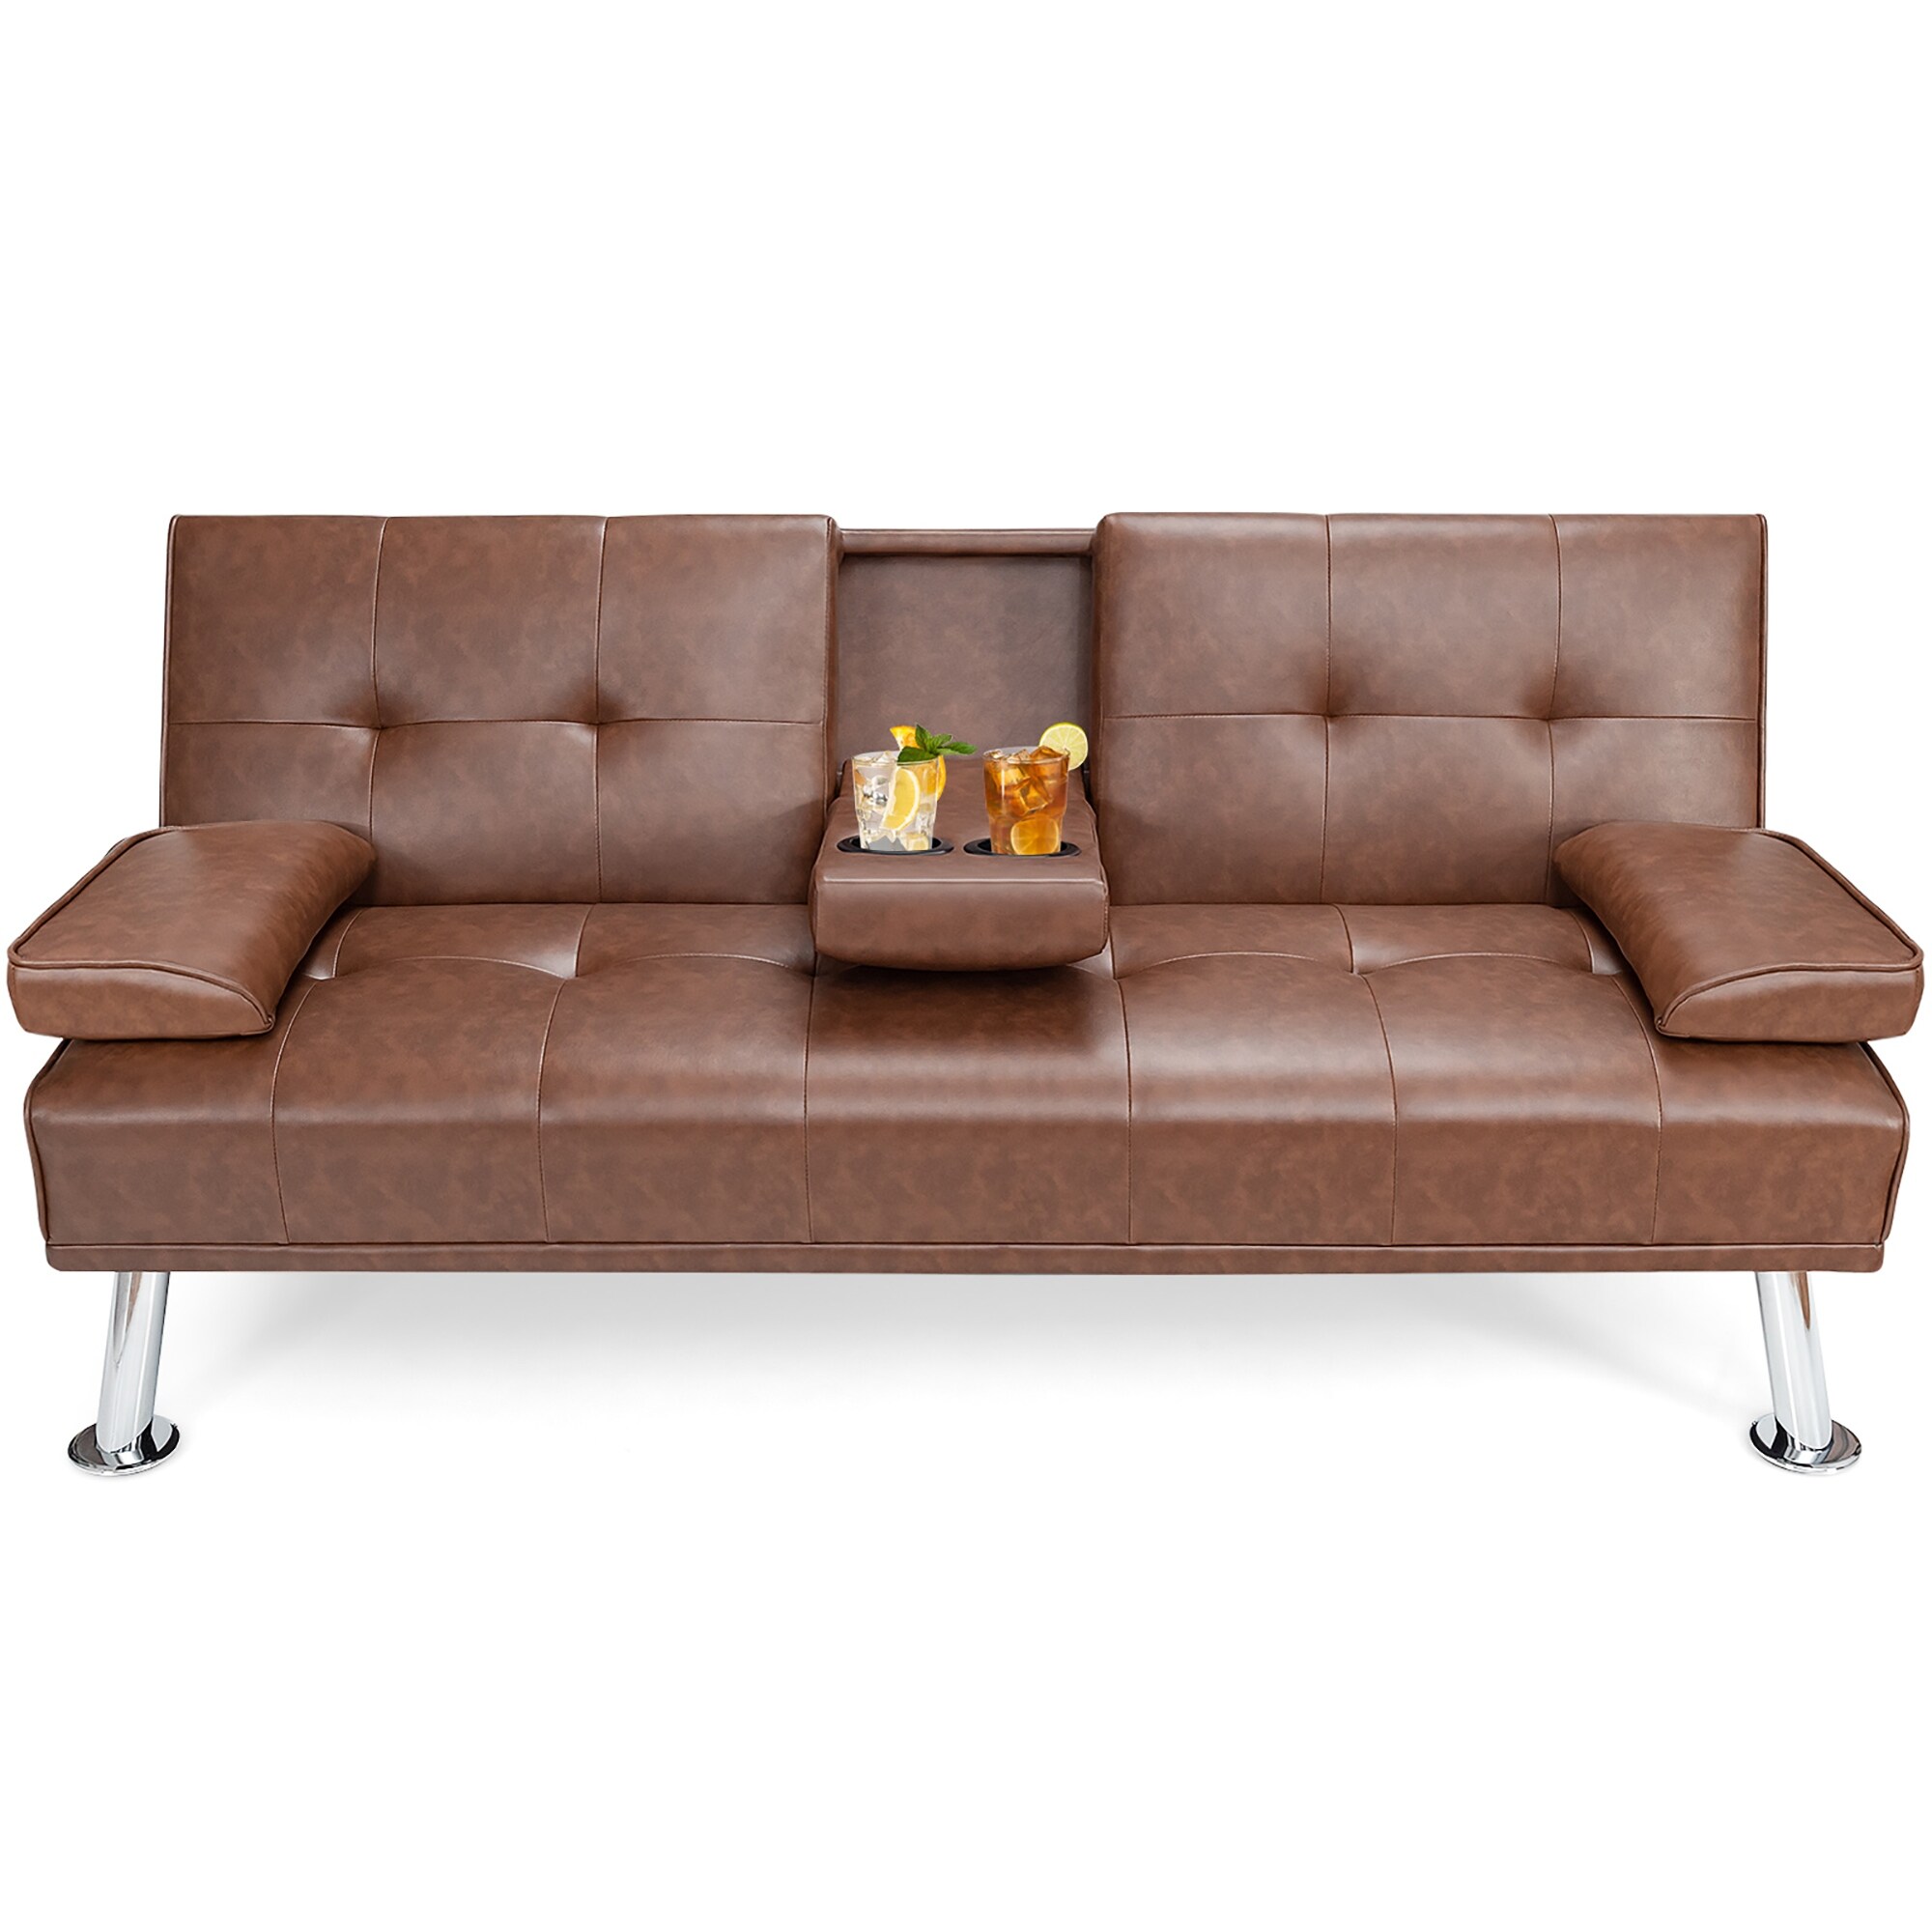 Costway Convertible Folding Futon Sofa Bed Leather w/Cup - 66x37x16.5